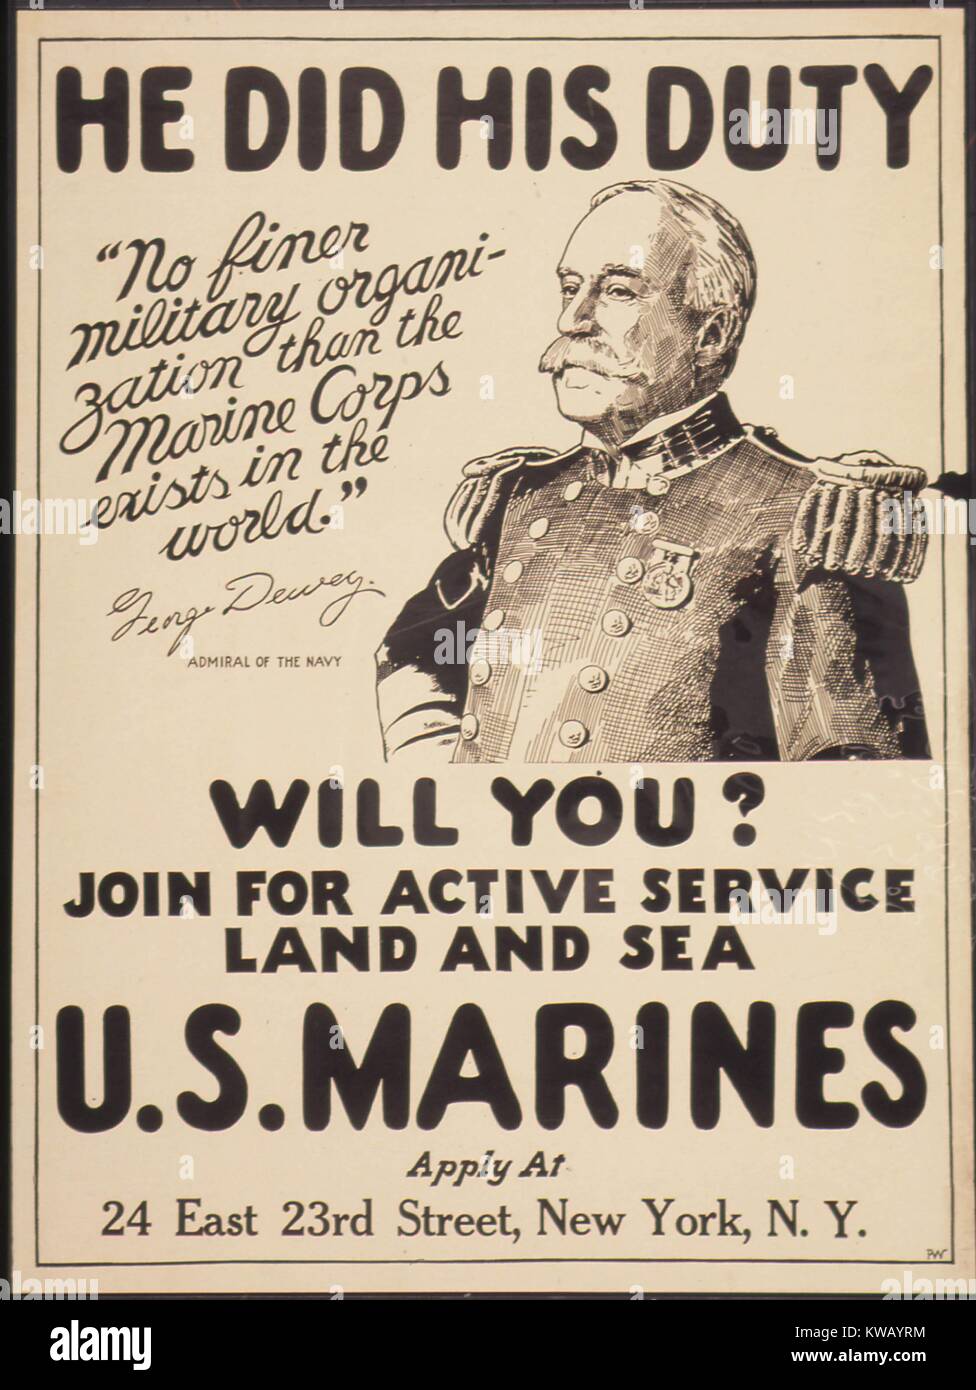 Poster from World War I depicting Navy Admiral George Dewey and encouraging active service duty in the United States Marine Corps, 1917. Image courtesy National Archives. Stock Photo